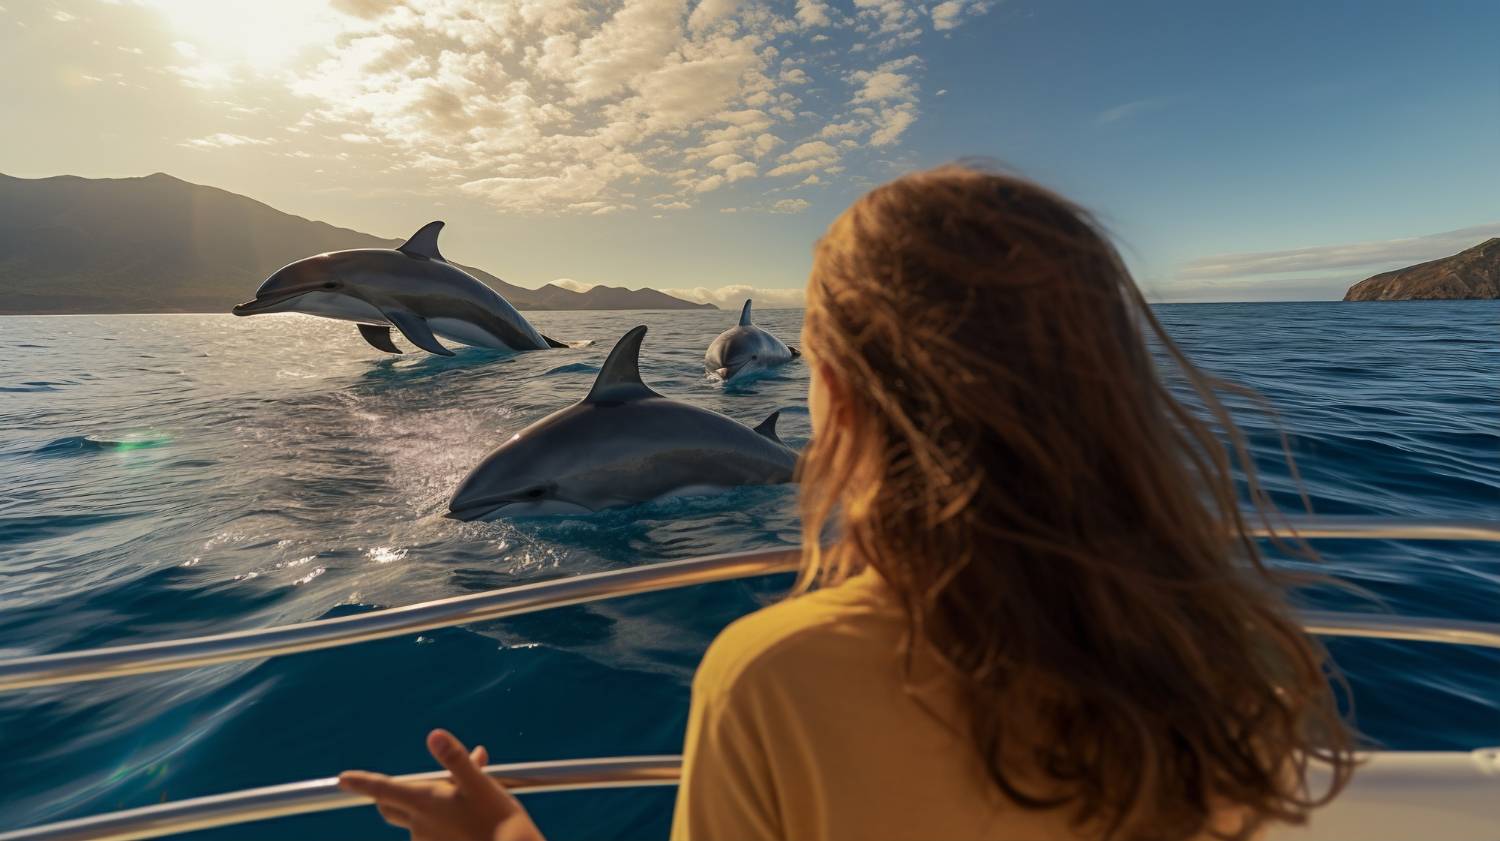 "A woman watches in awe as dolphins arc over the waves in a stunning encounter at sea."